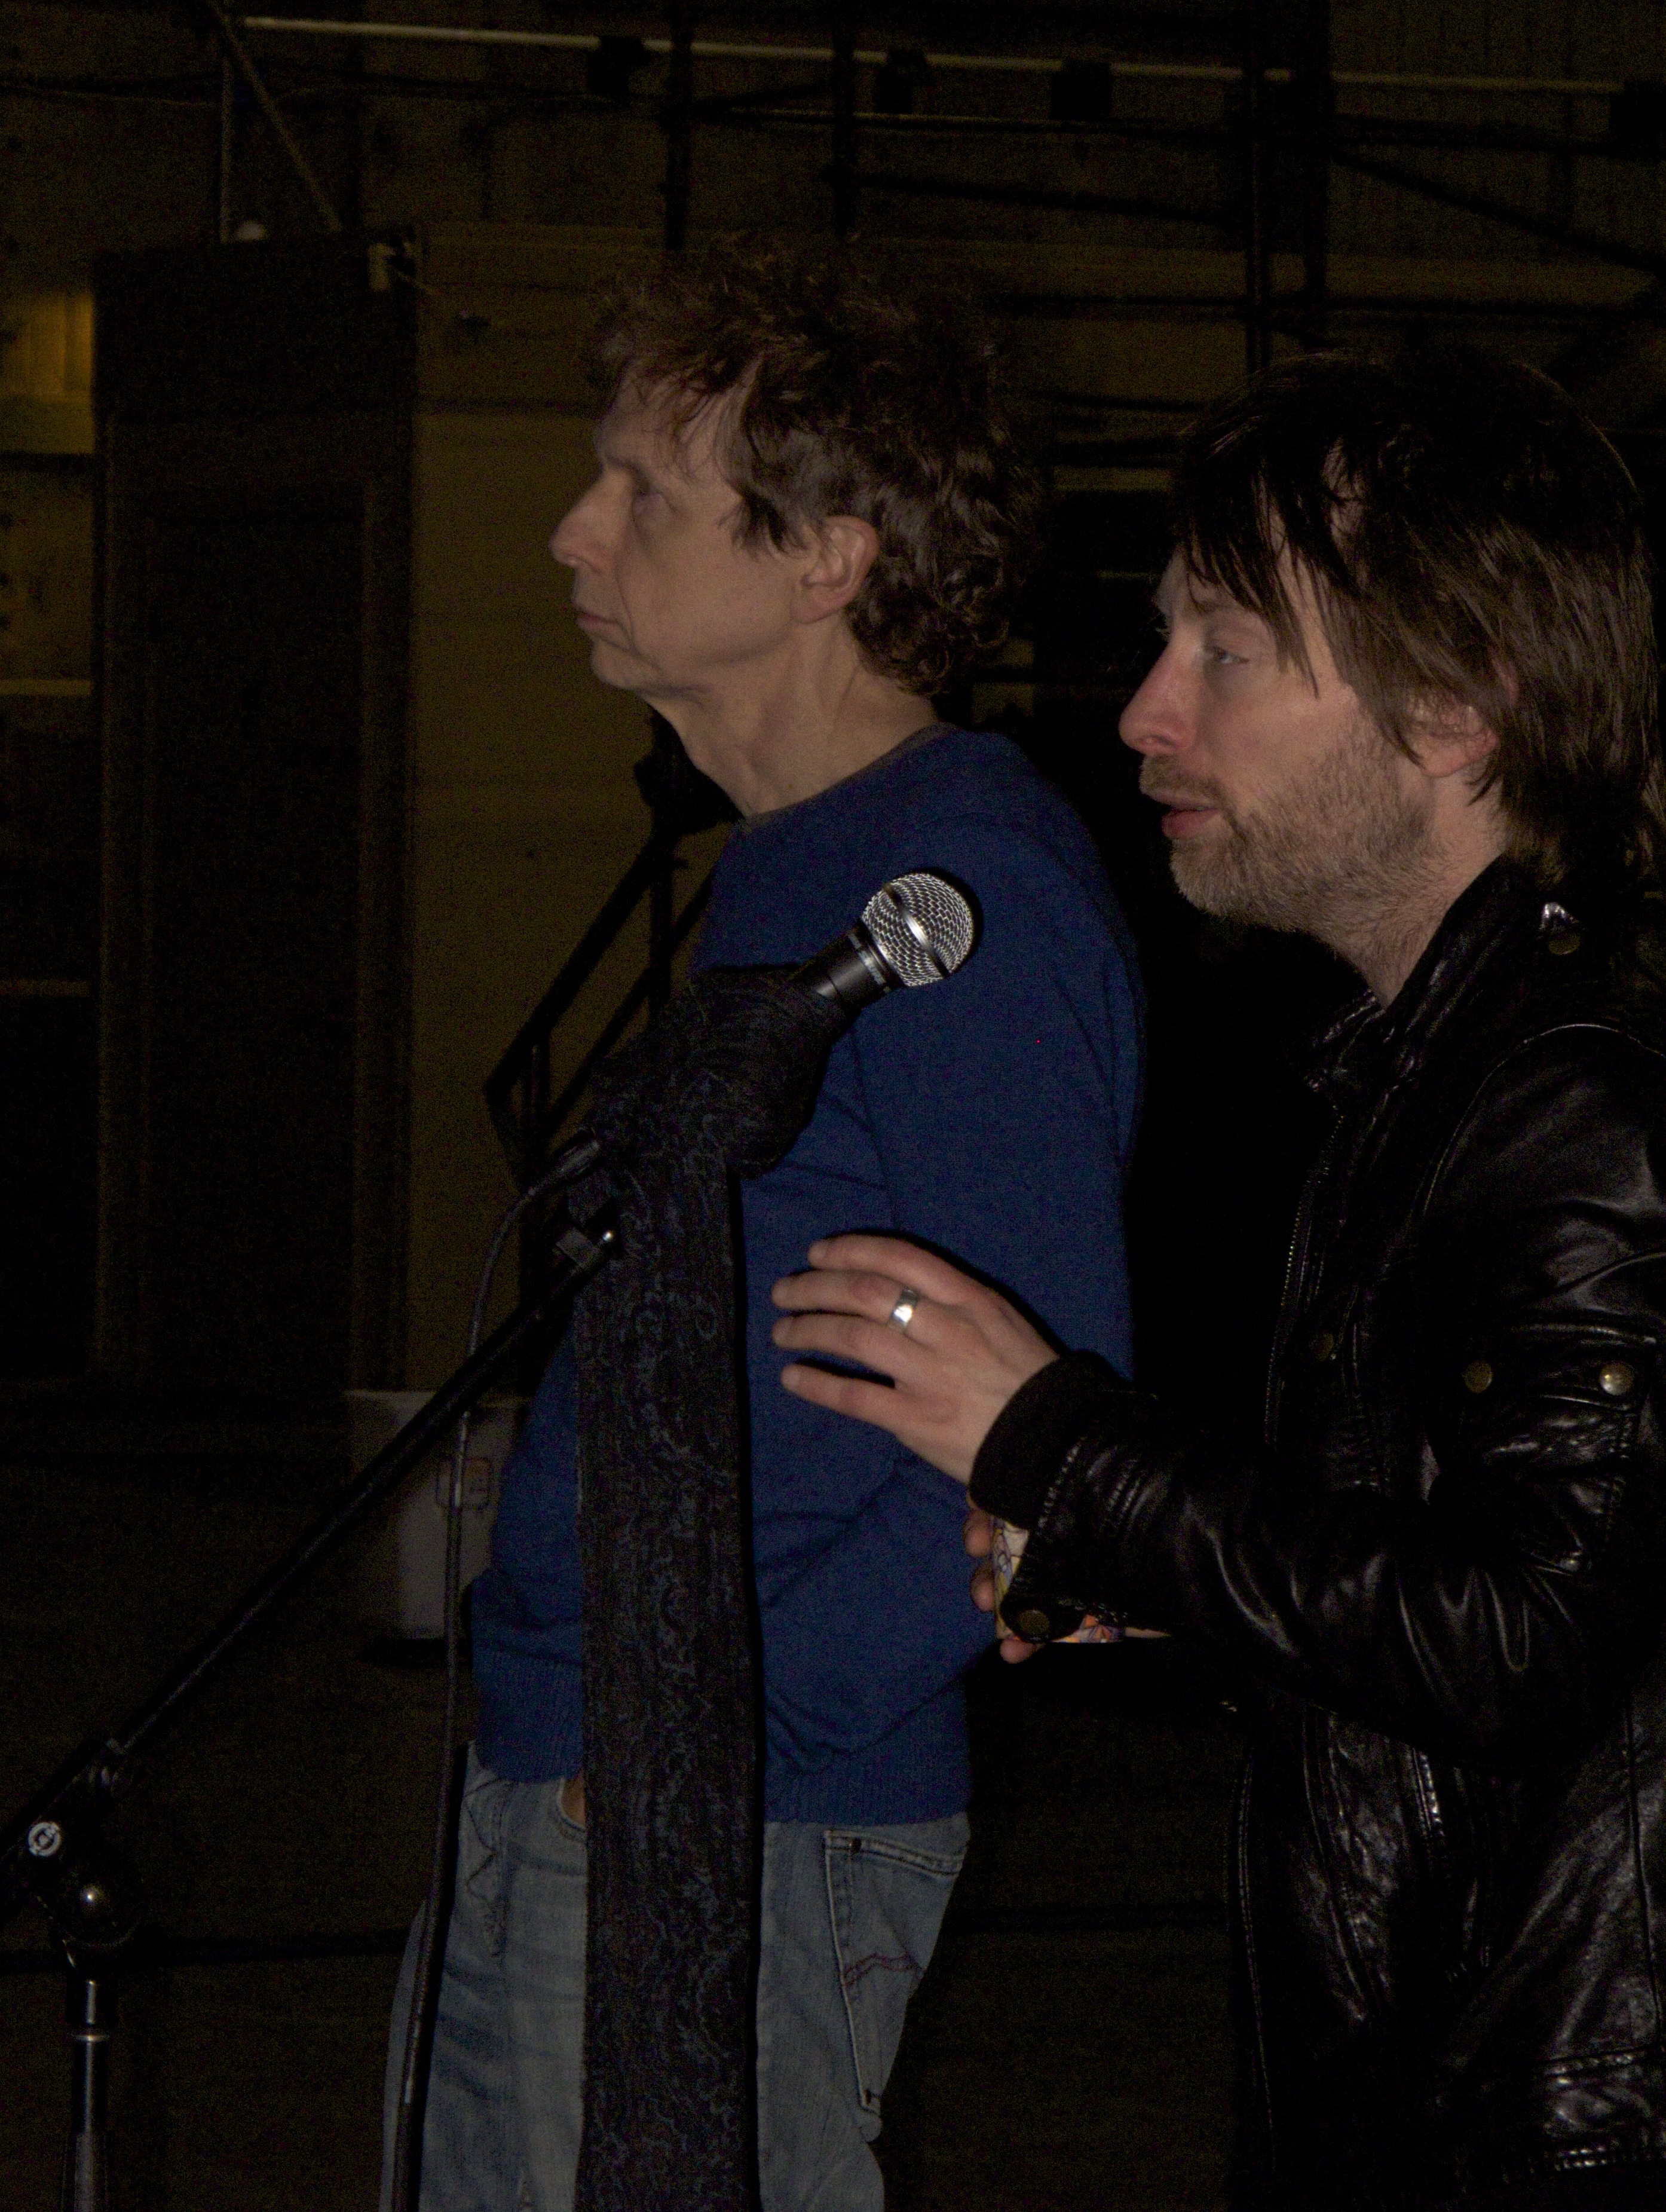 David Campbell with Thom Yorke